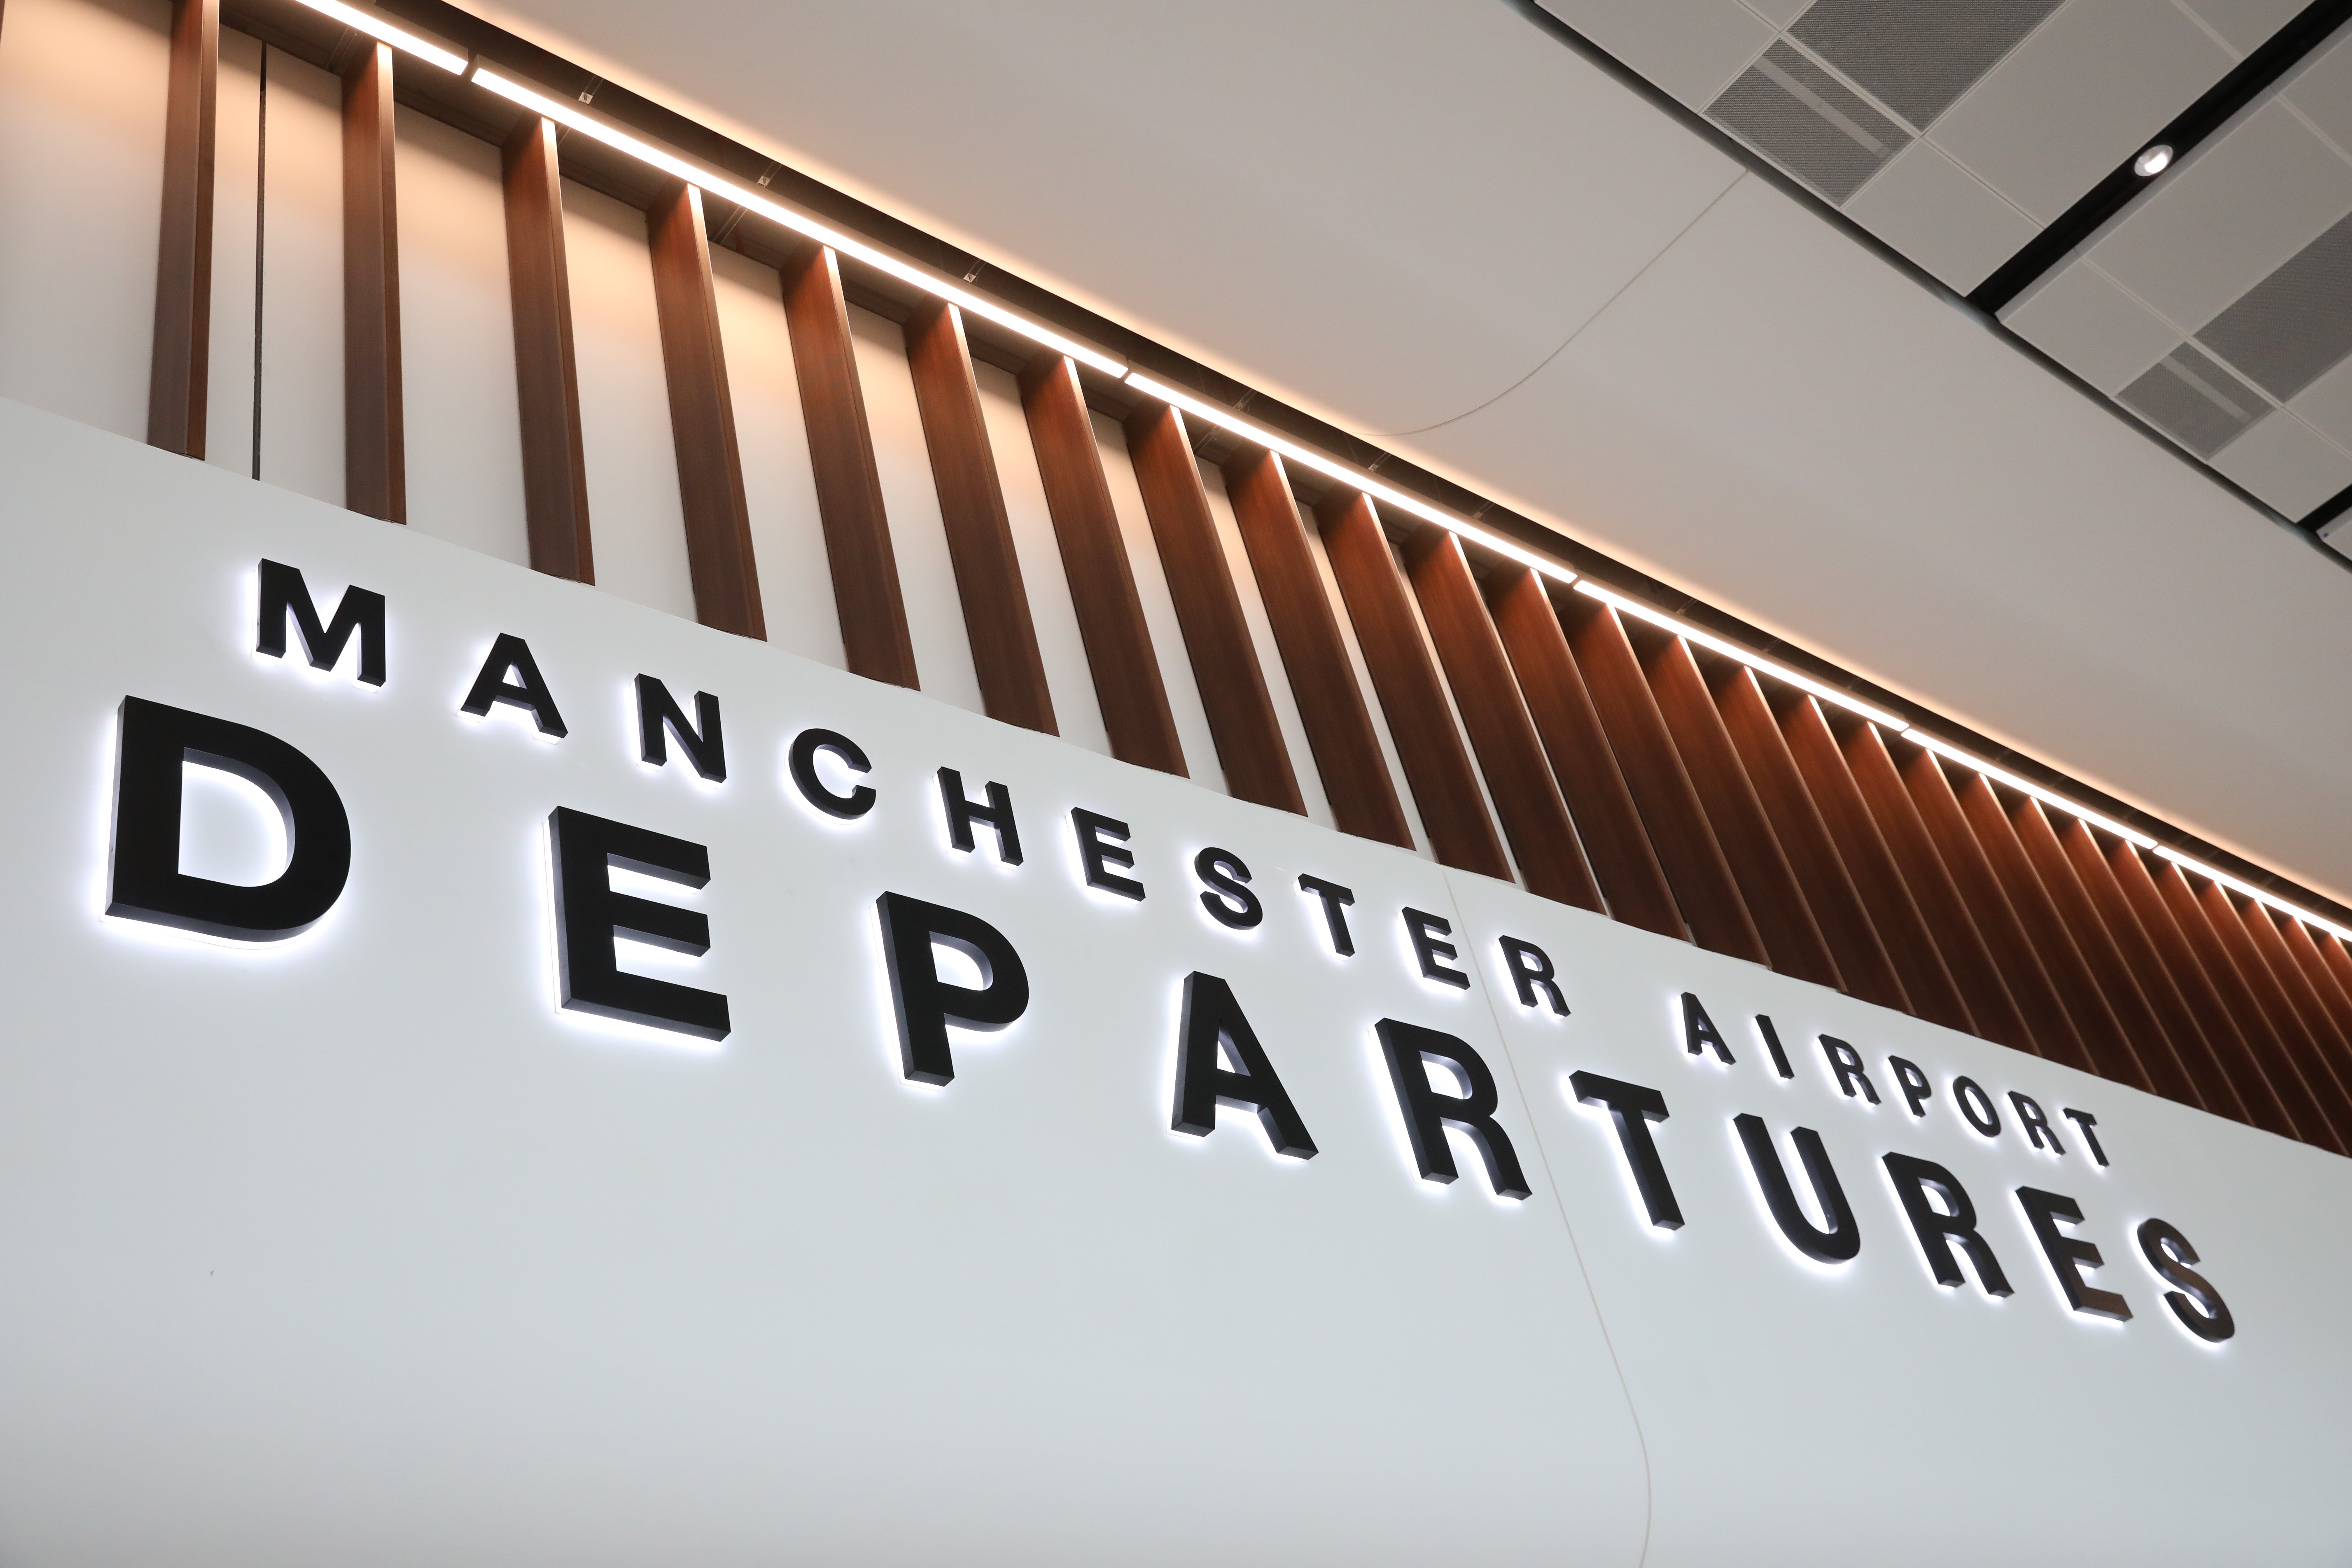 Mr Abedi left the UK from Manchester Airport on 29 August